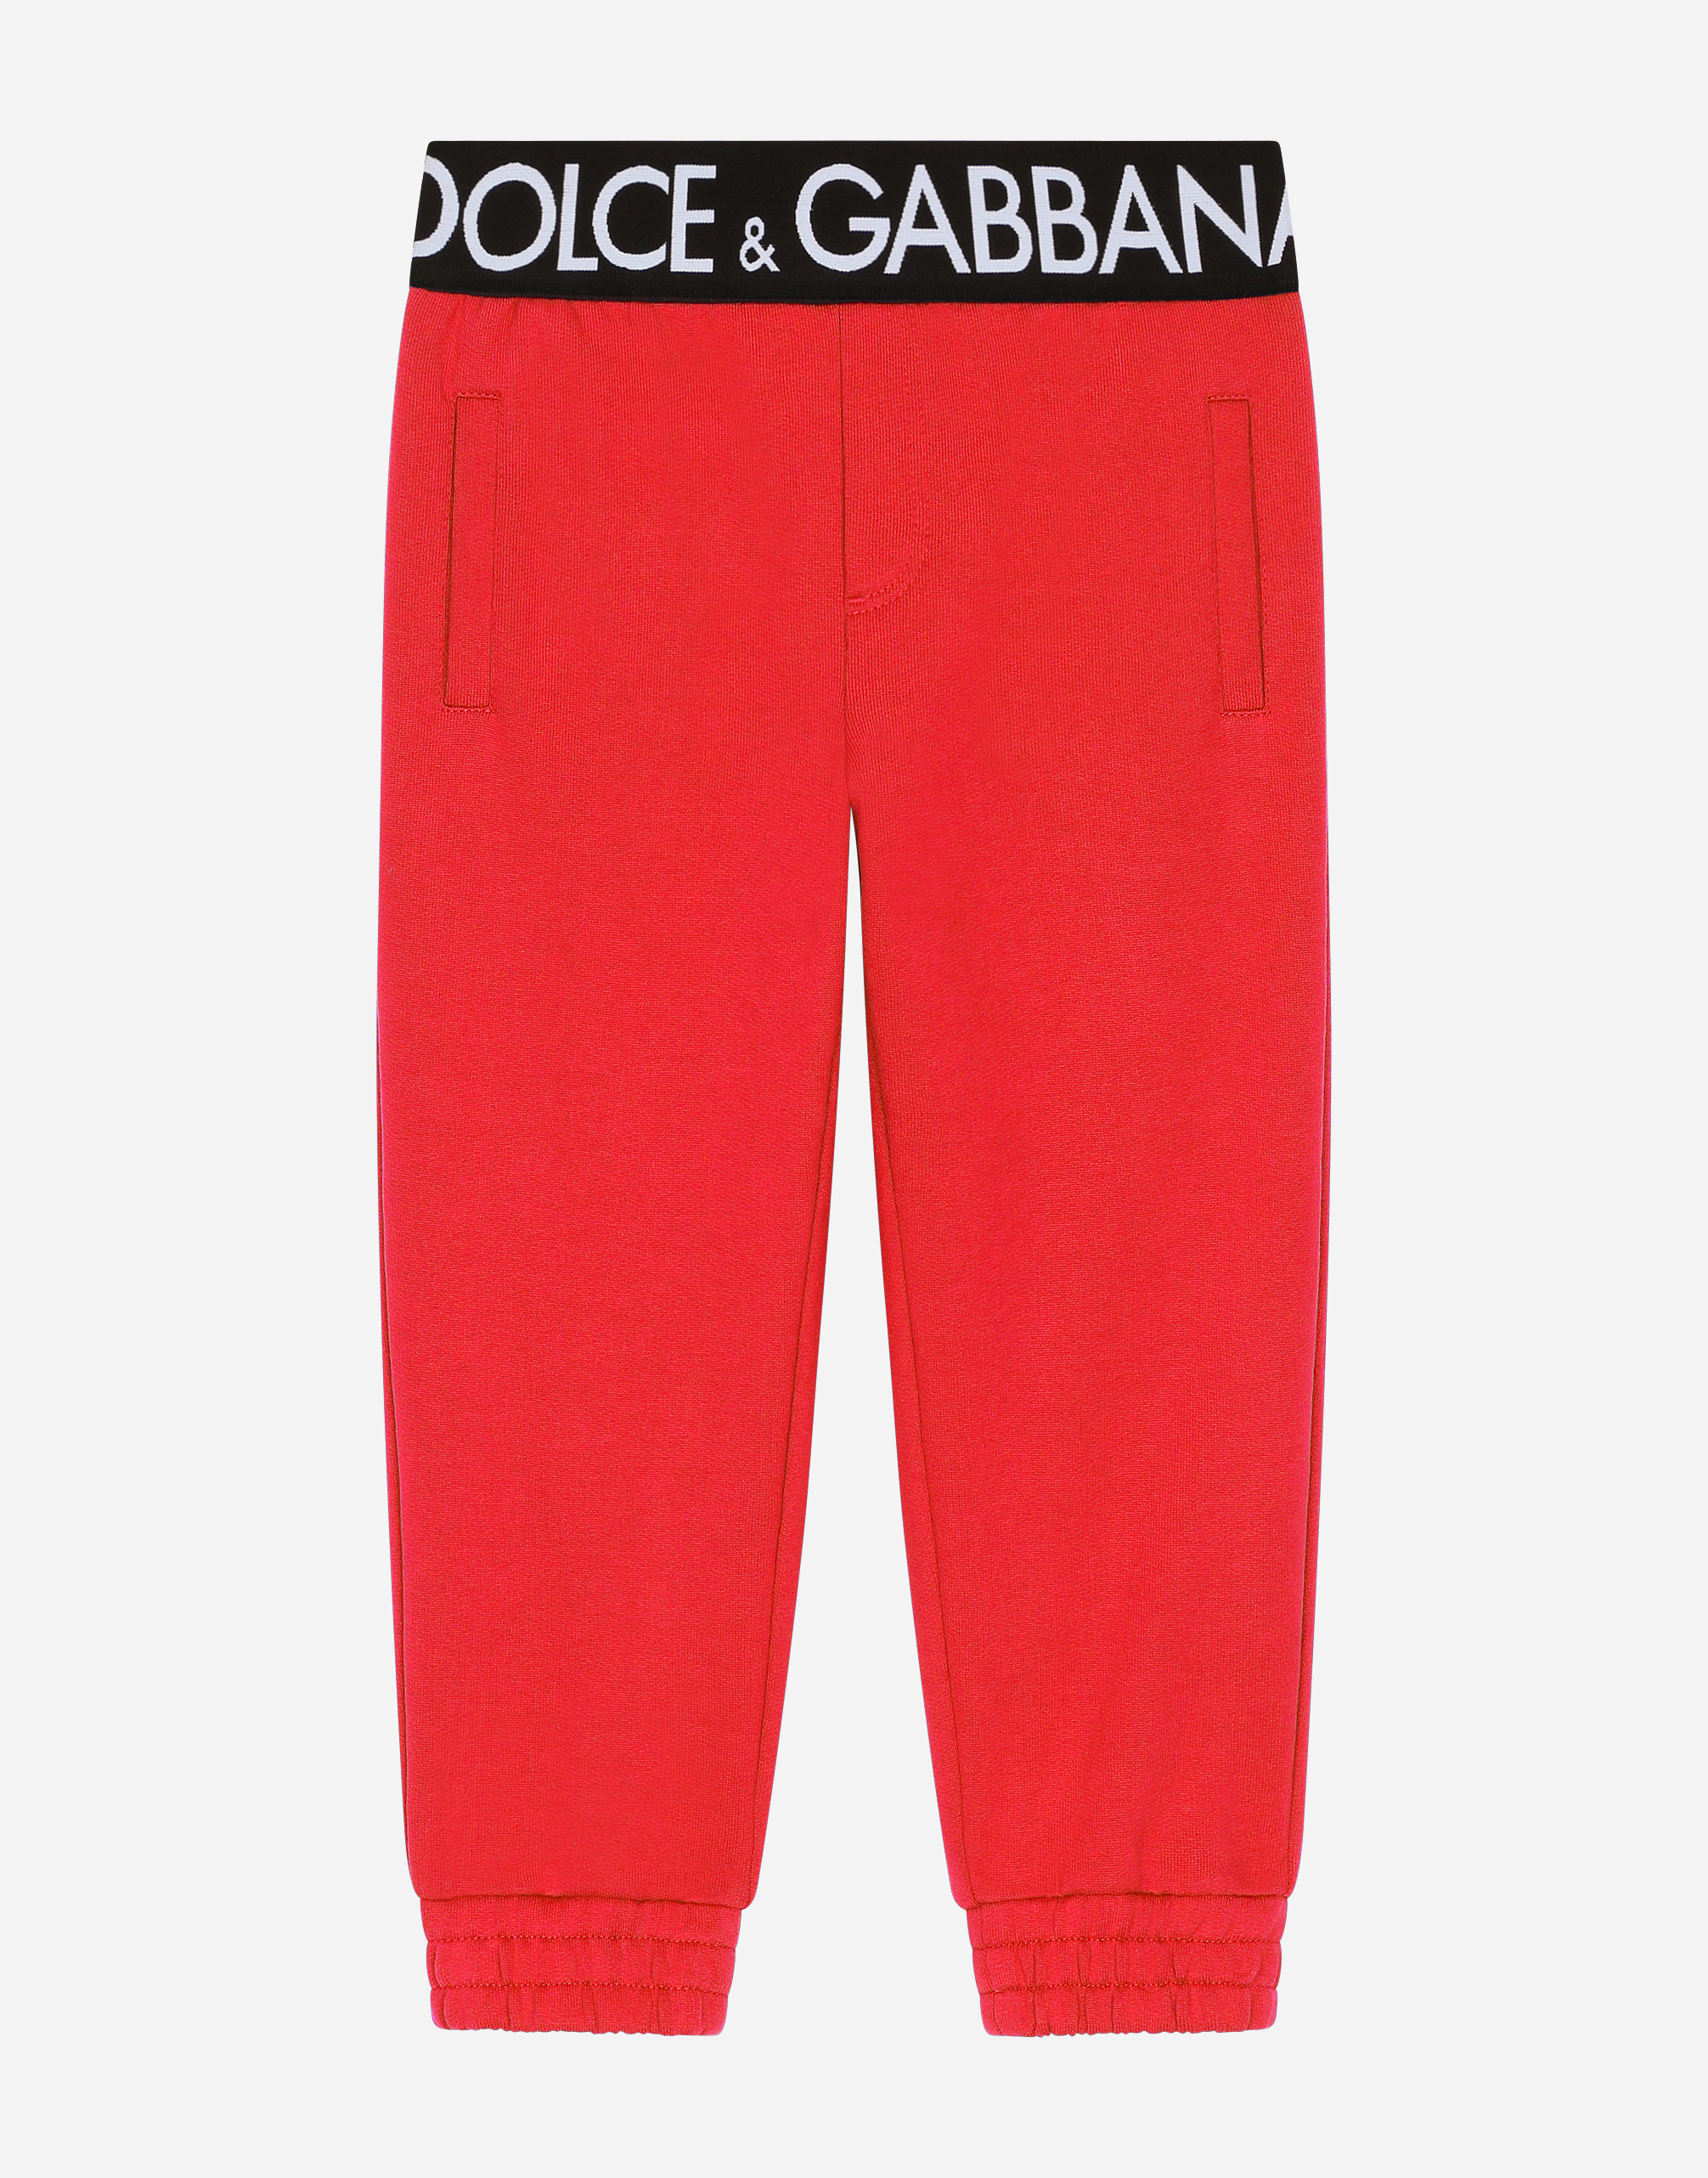 Dolce & Gabbana Kids' Jersey Jogging Pants With Branded Elastic In Red